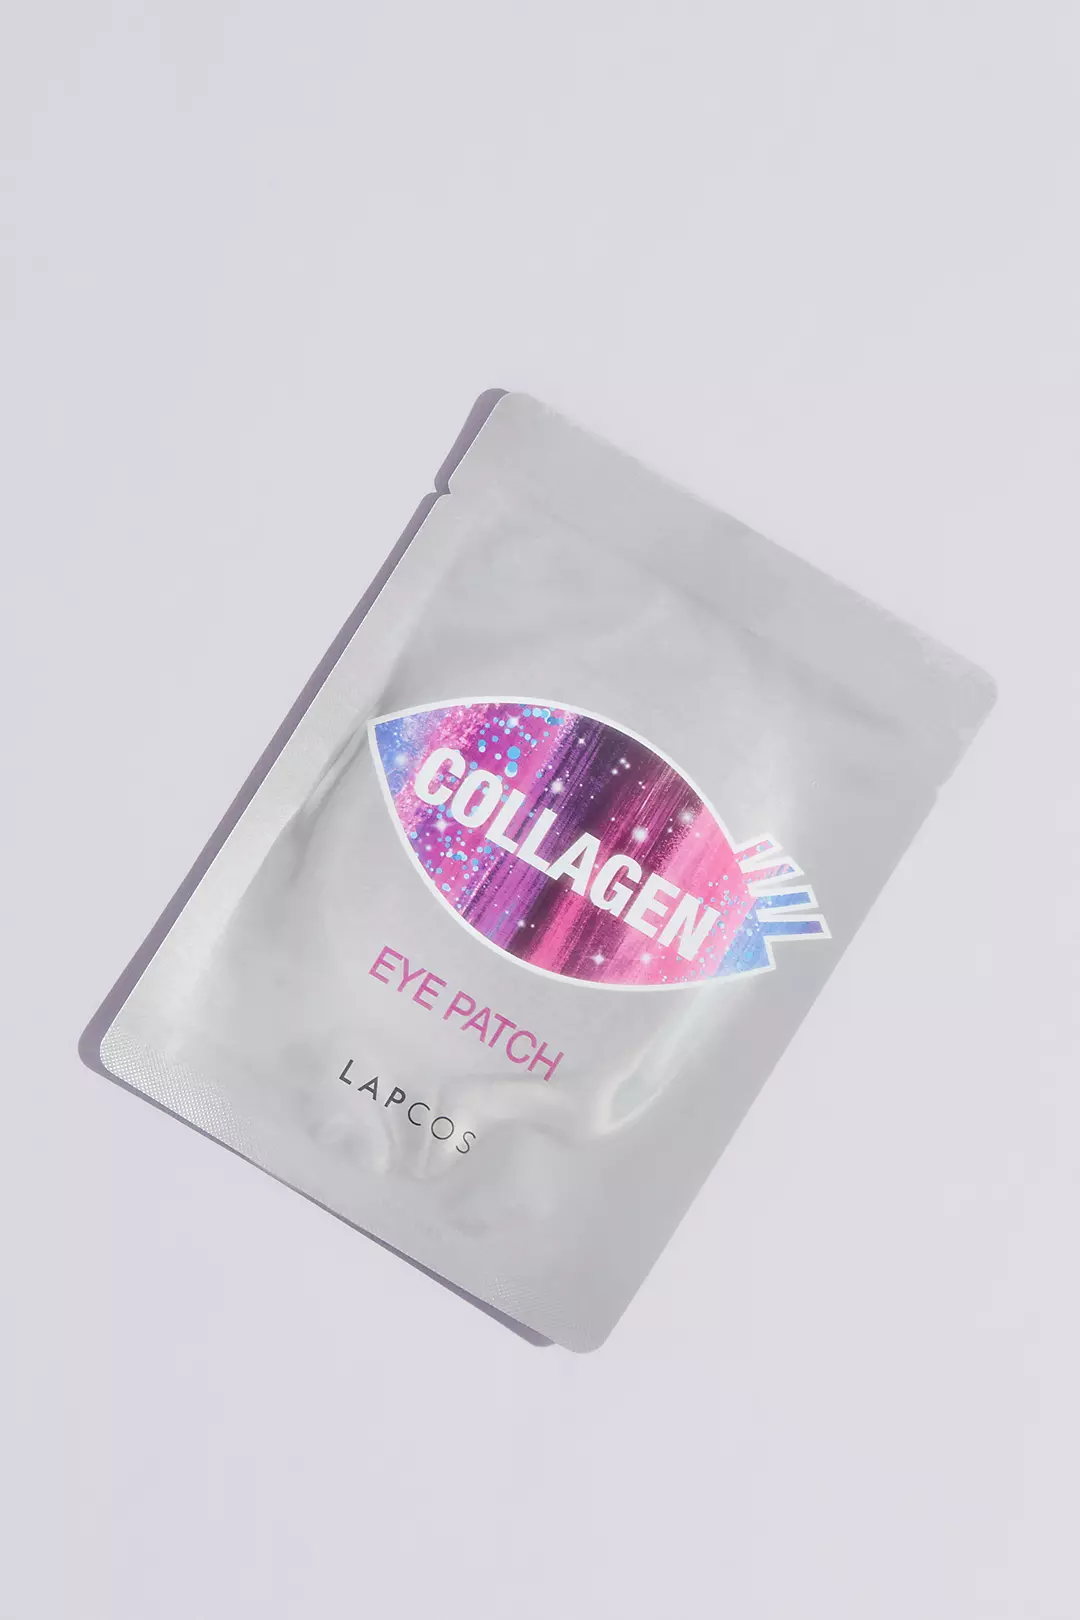 Lapcos Collagen Eye Patch Mask Image